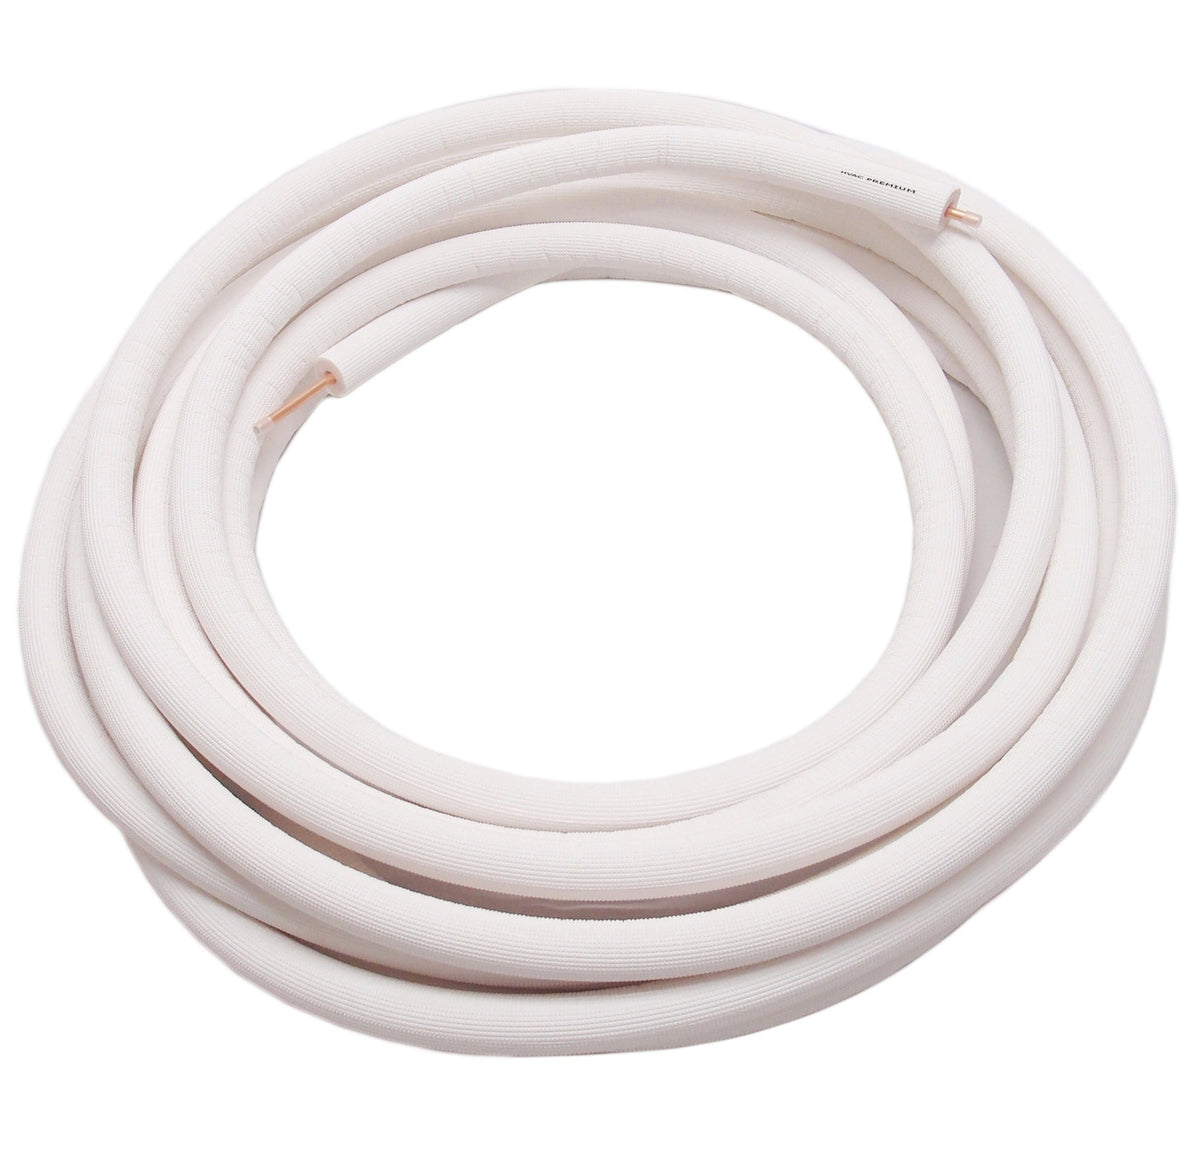 5/8&quot; Insulated Copper Coil Line - Seamless Pipe Tube for HVAC, Refrigerant - 1/2&quot; White Insulation - 50&#39; Long